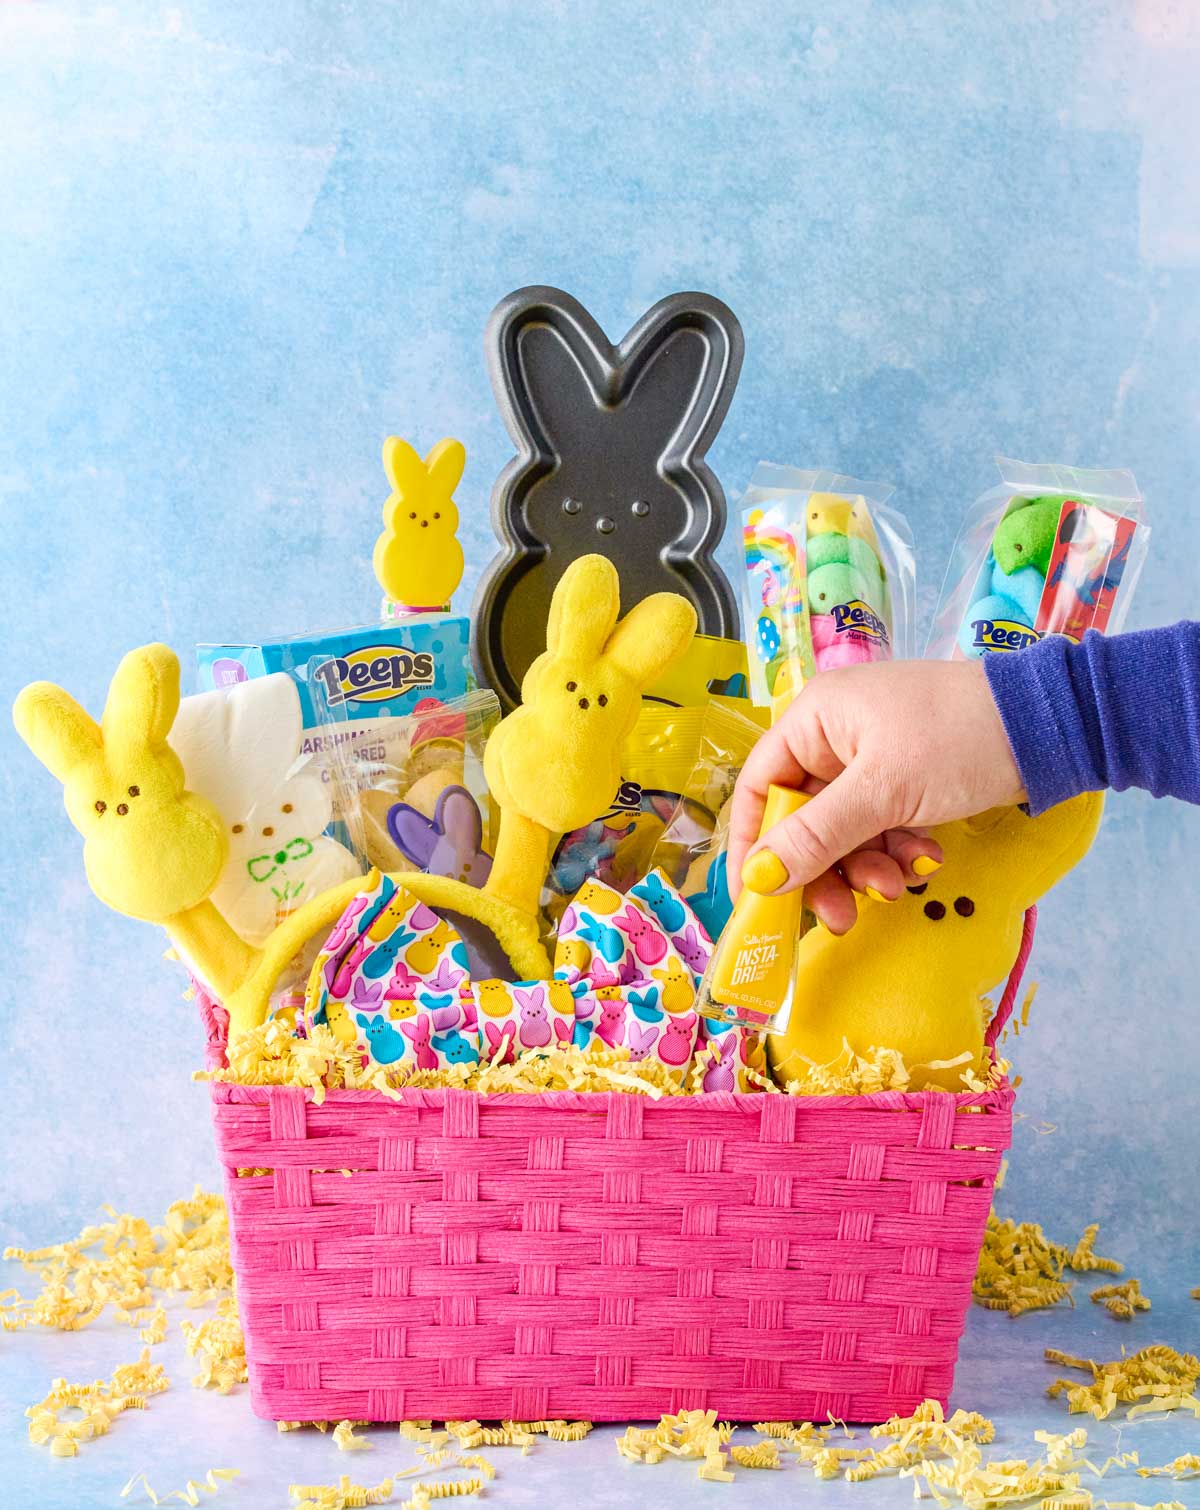 Hand reaching into Peeps Easter basket to place yellow nail polish